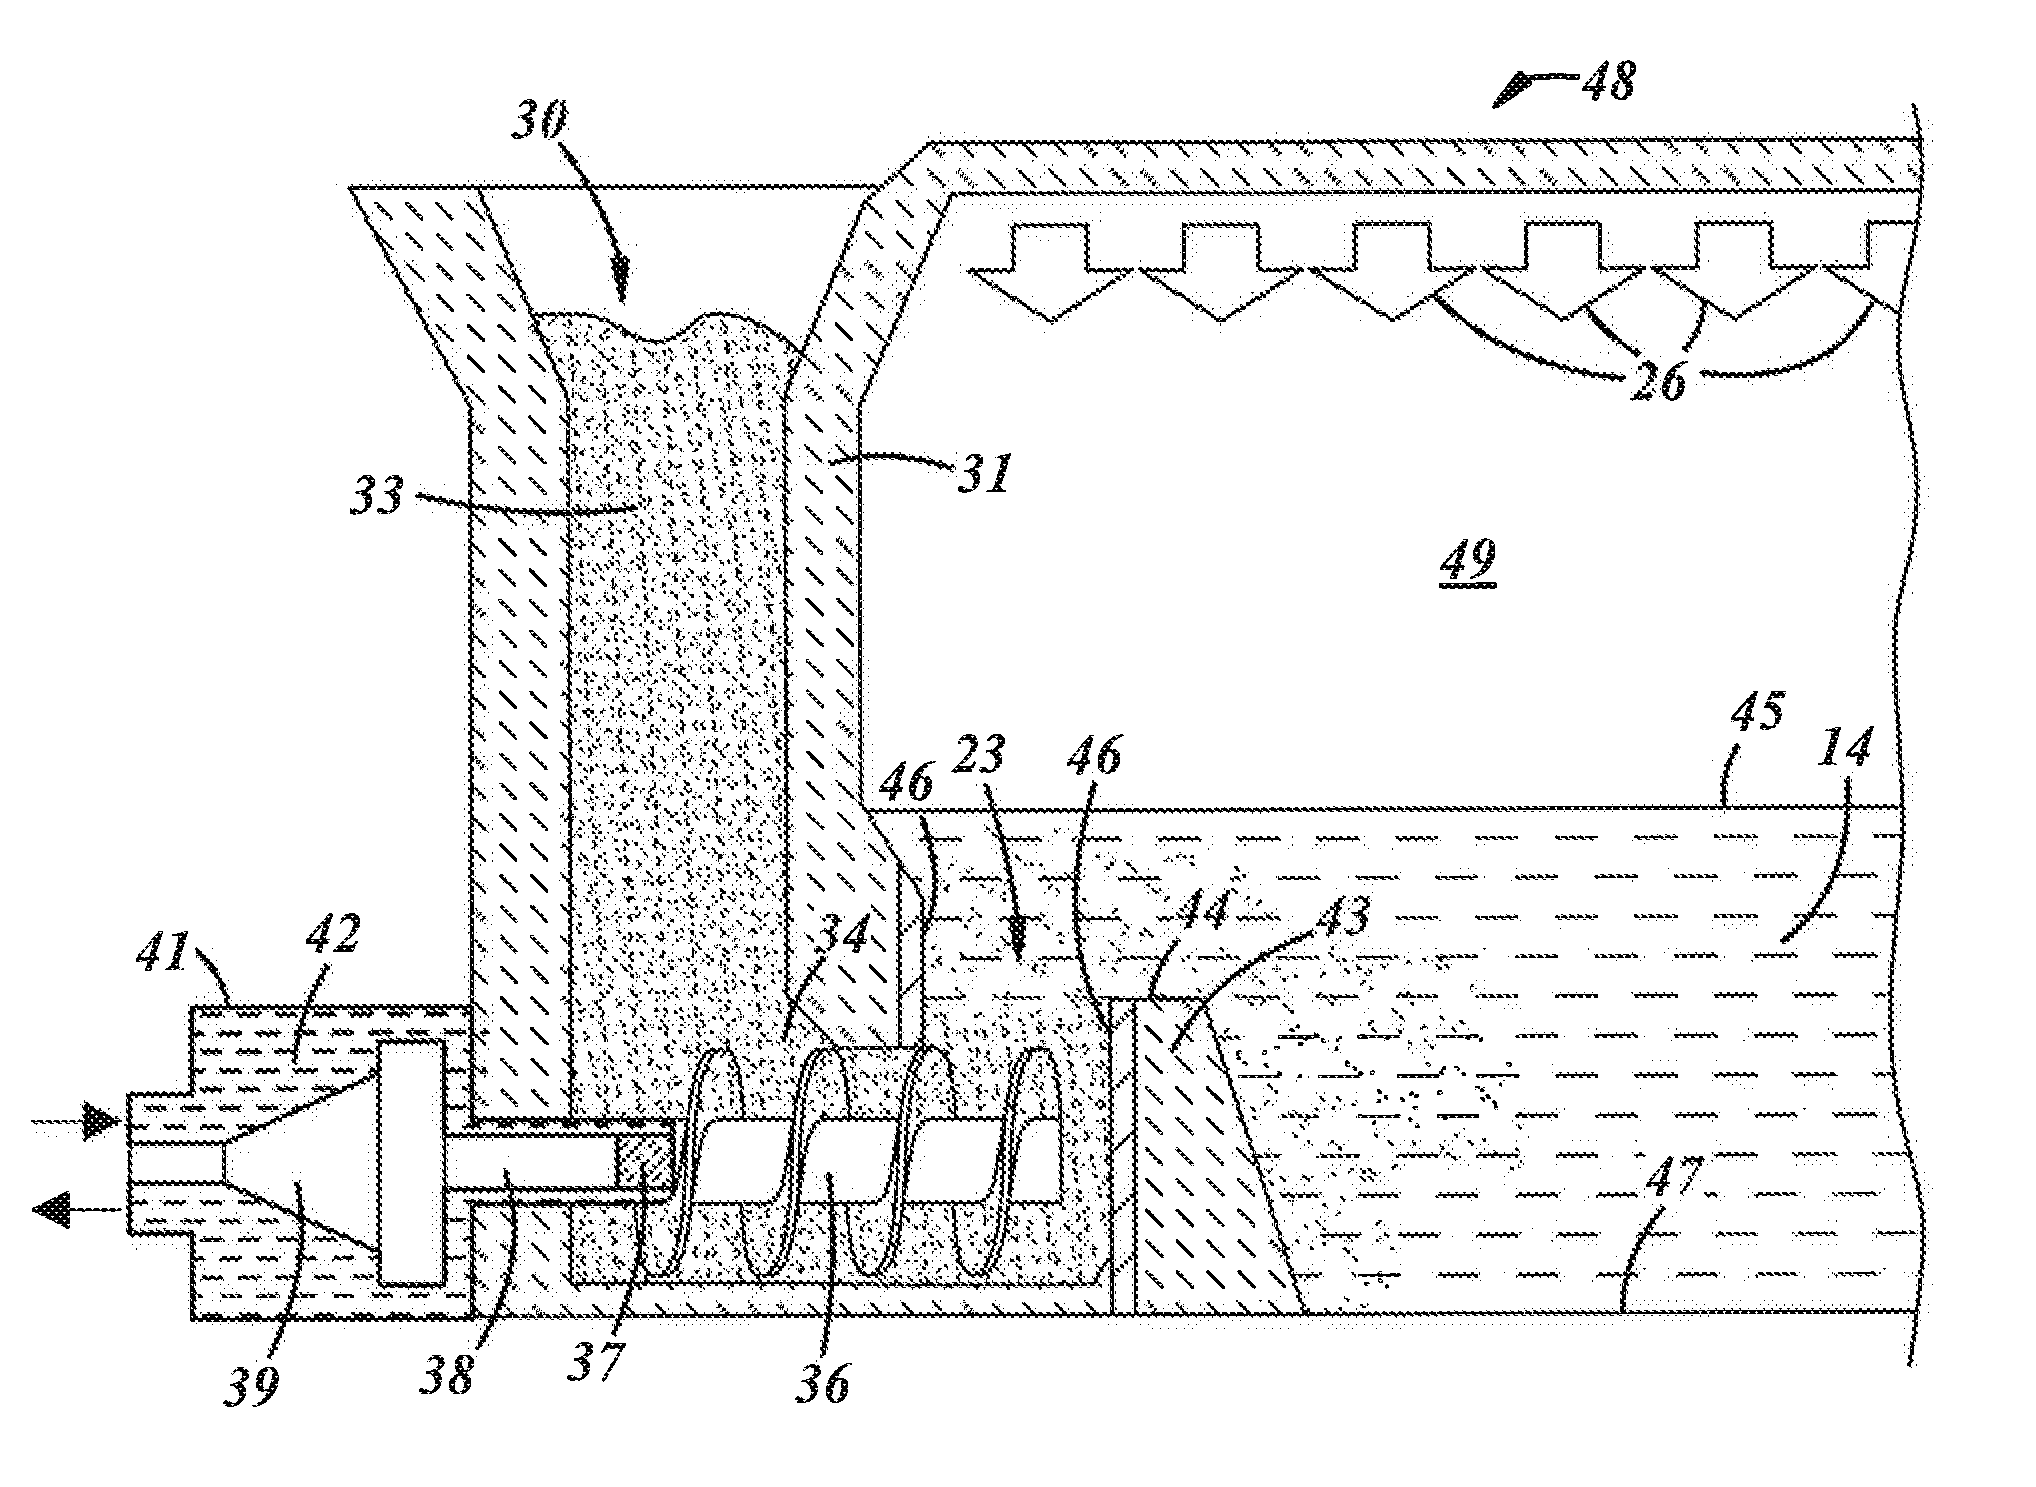 Glass Furnace with Bottom Material Feed